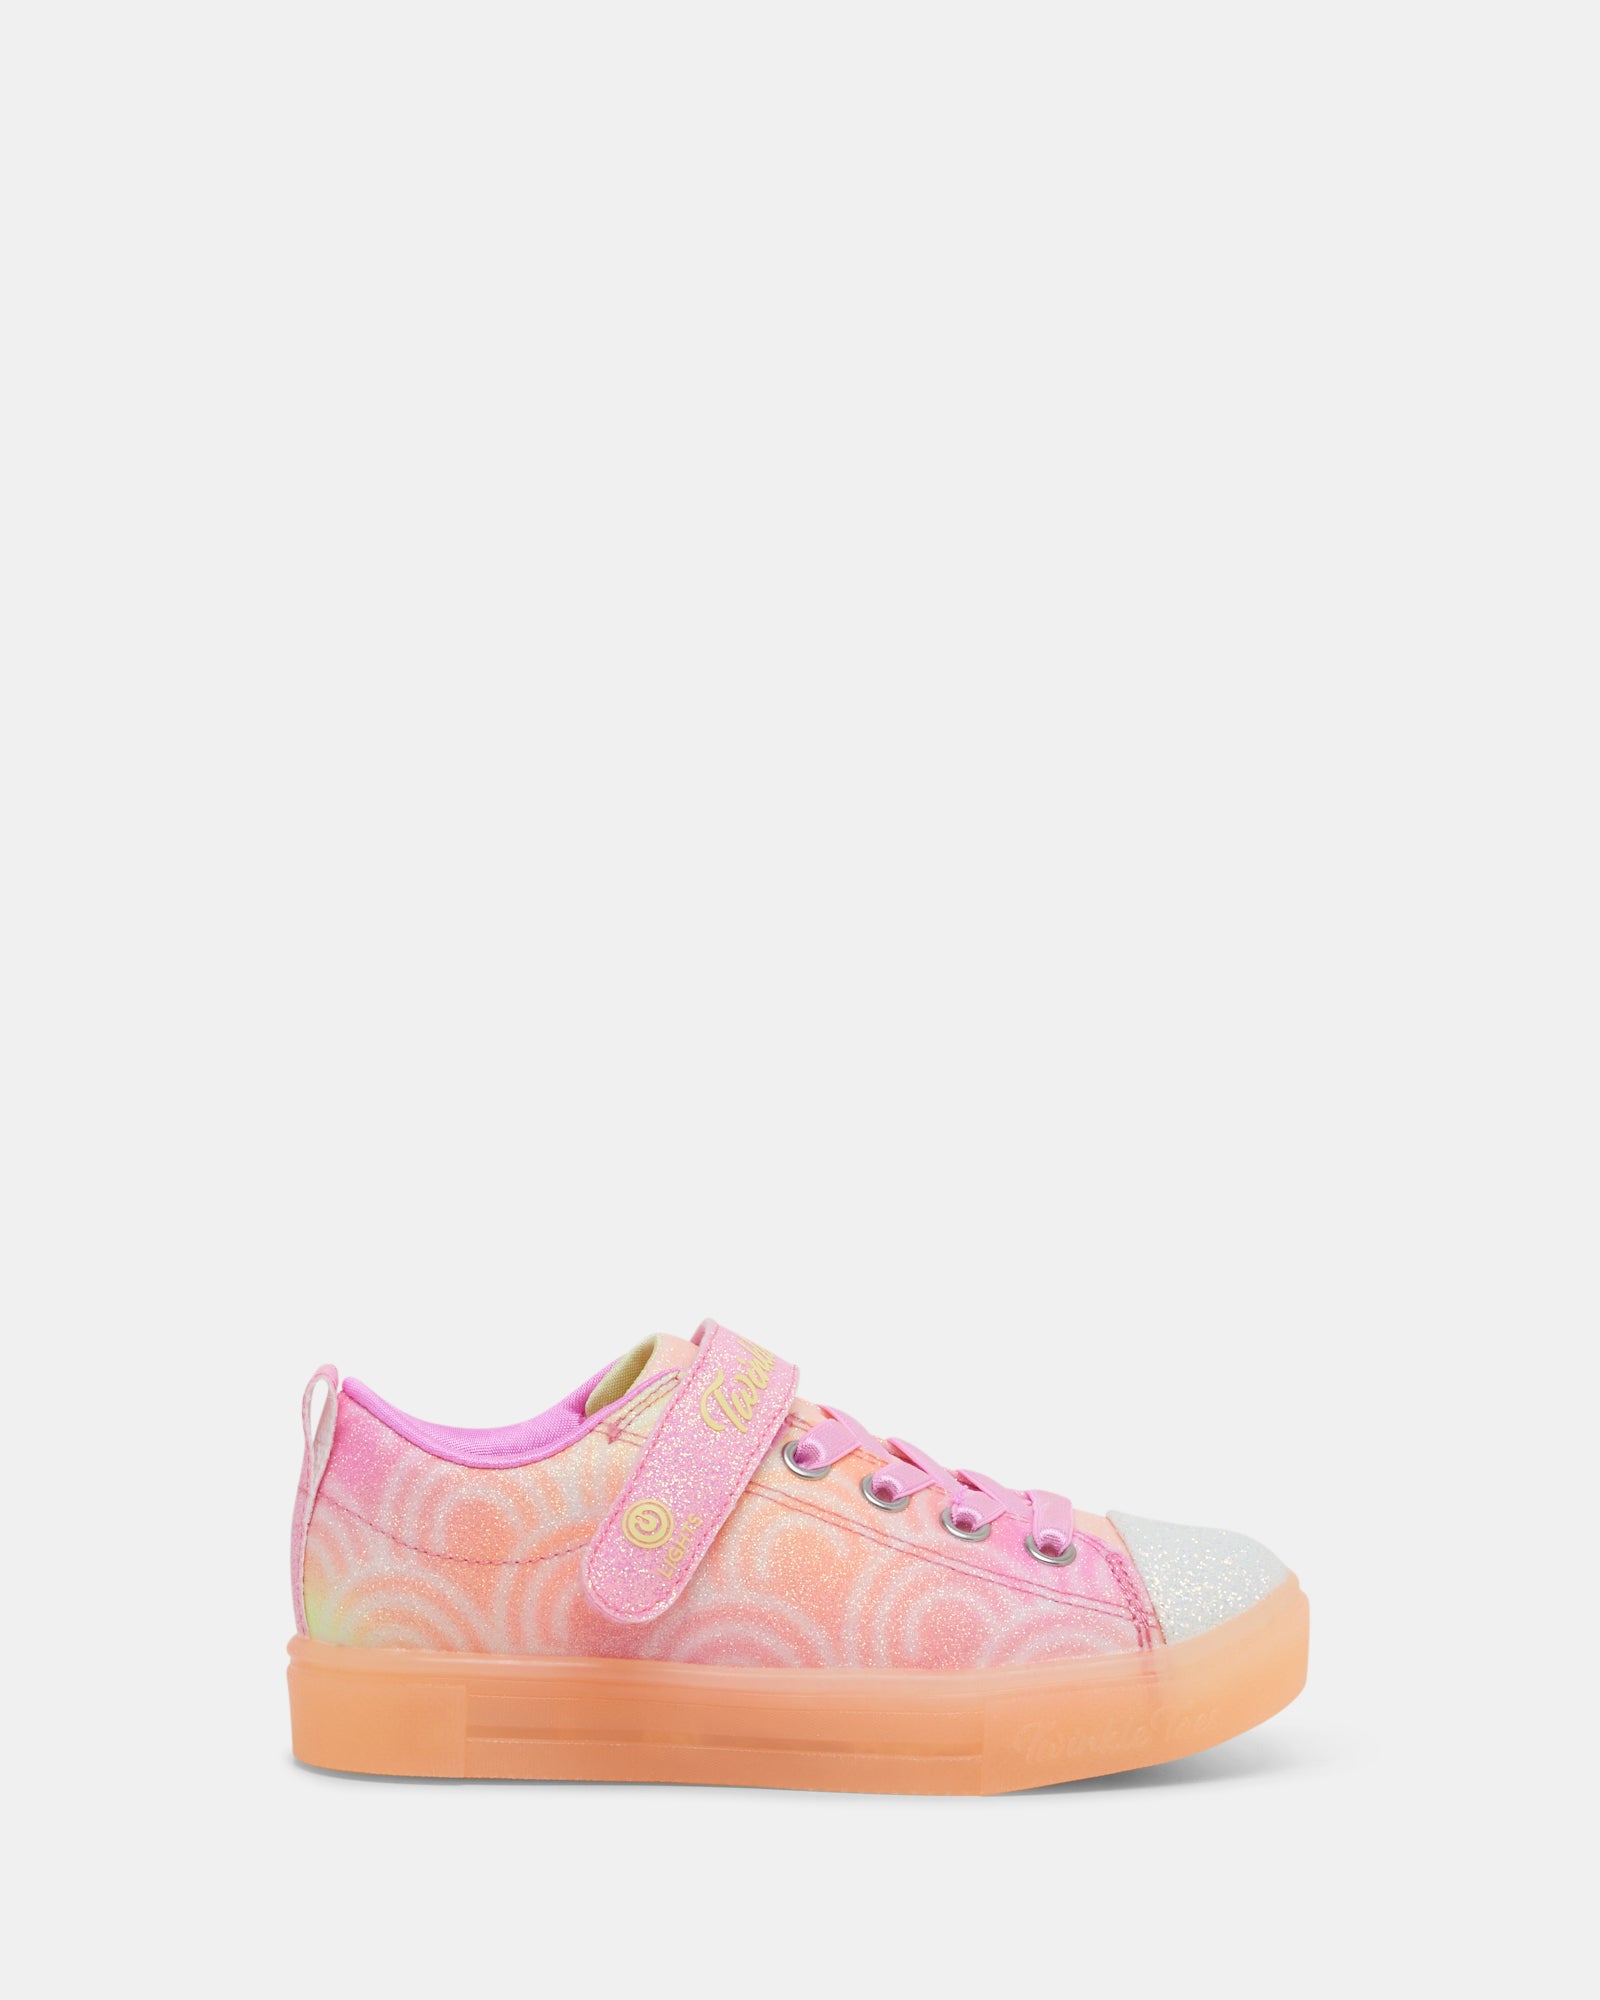 Twinkle Toes Dreamsicle Youth Pink/Multi